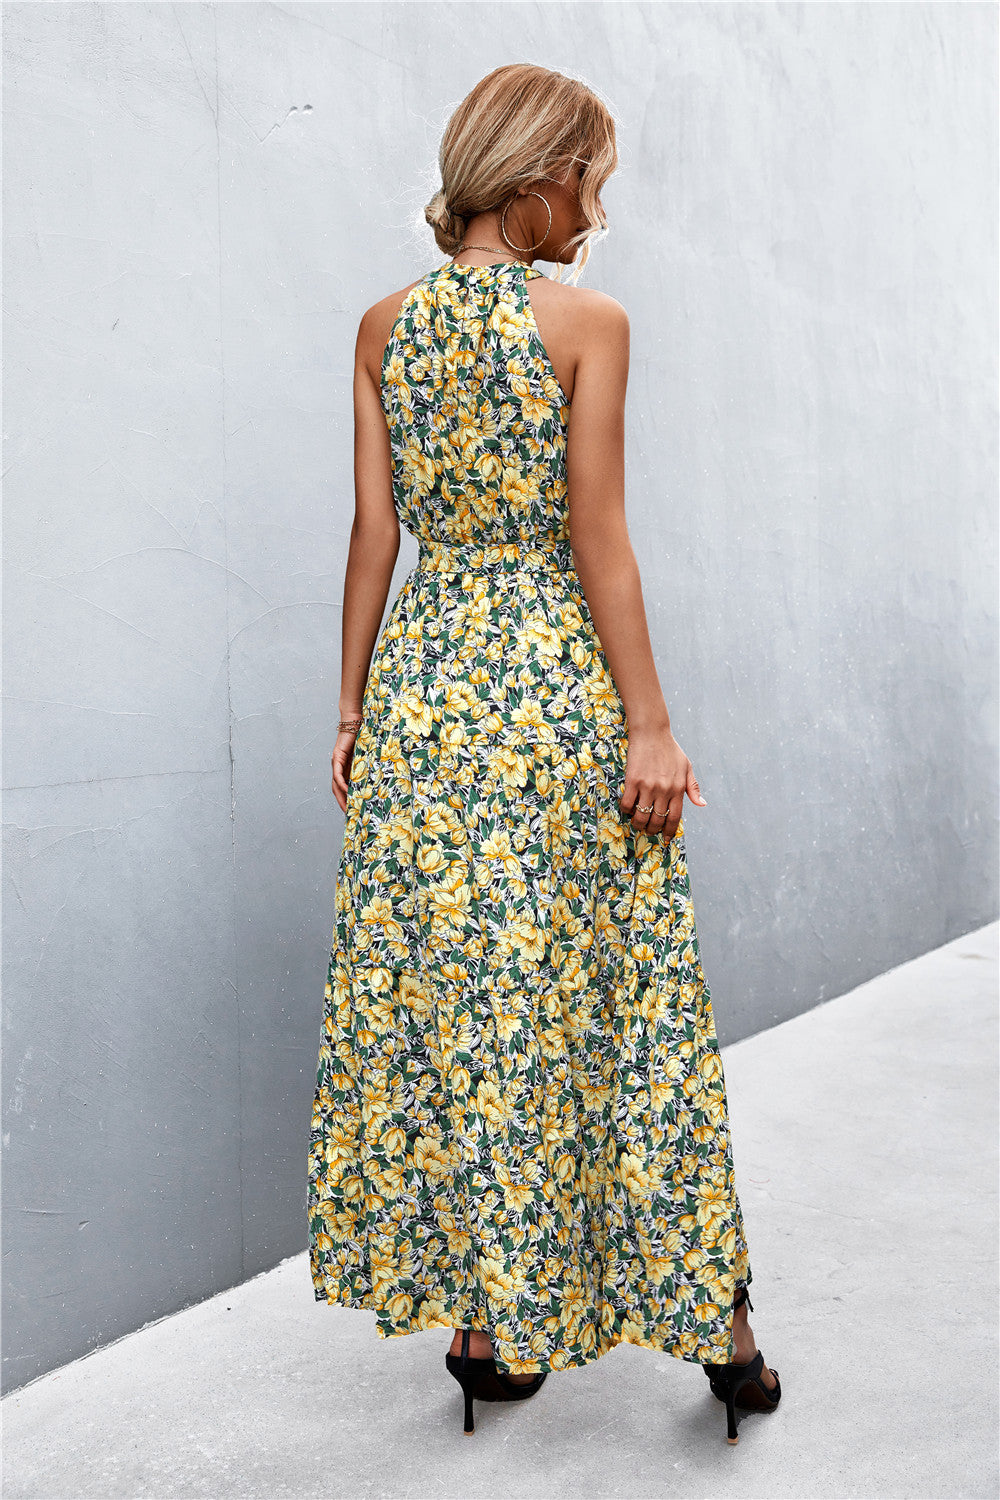 Shop the Printed Sleeveless Tie Waist Maxi Dress in 11 colors - perfect for summer days & elegant evenings. Flattering fit for every occasion.